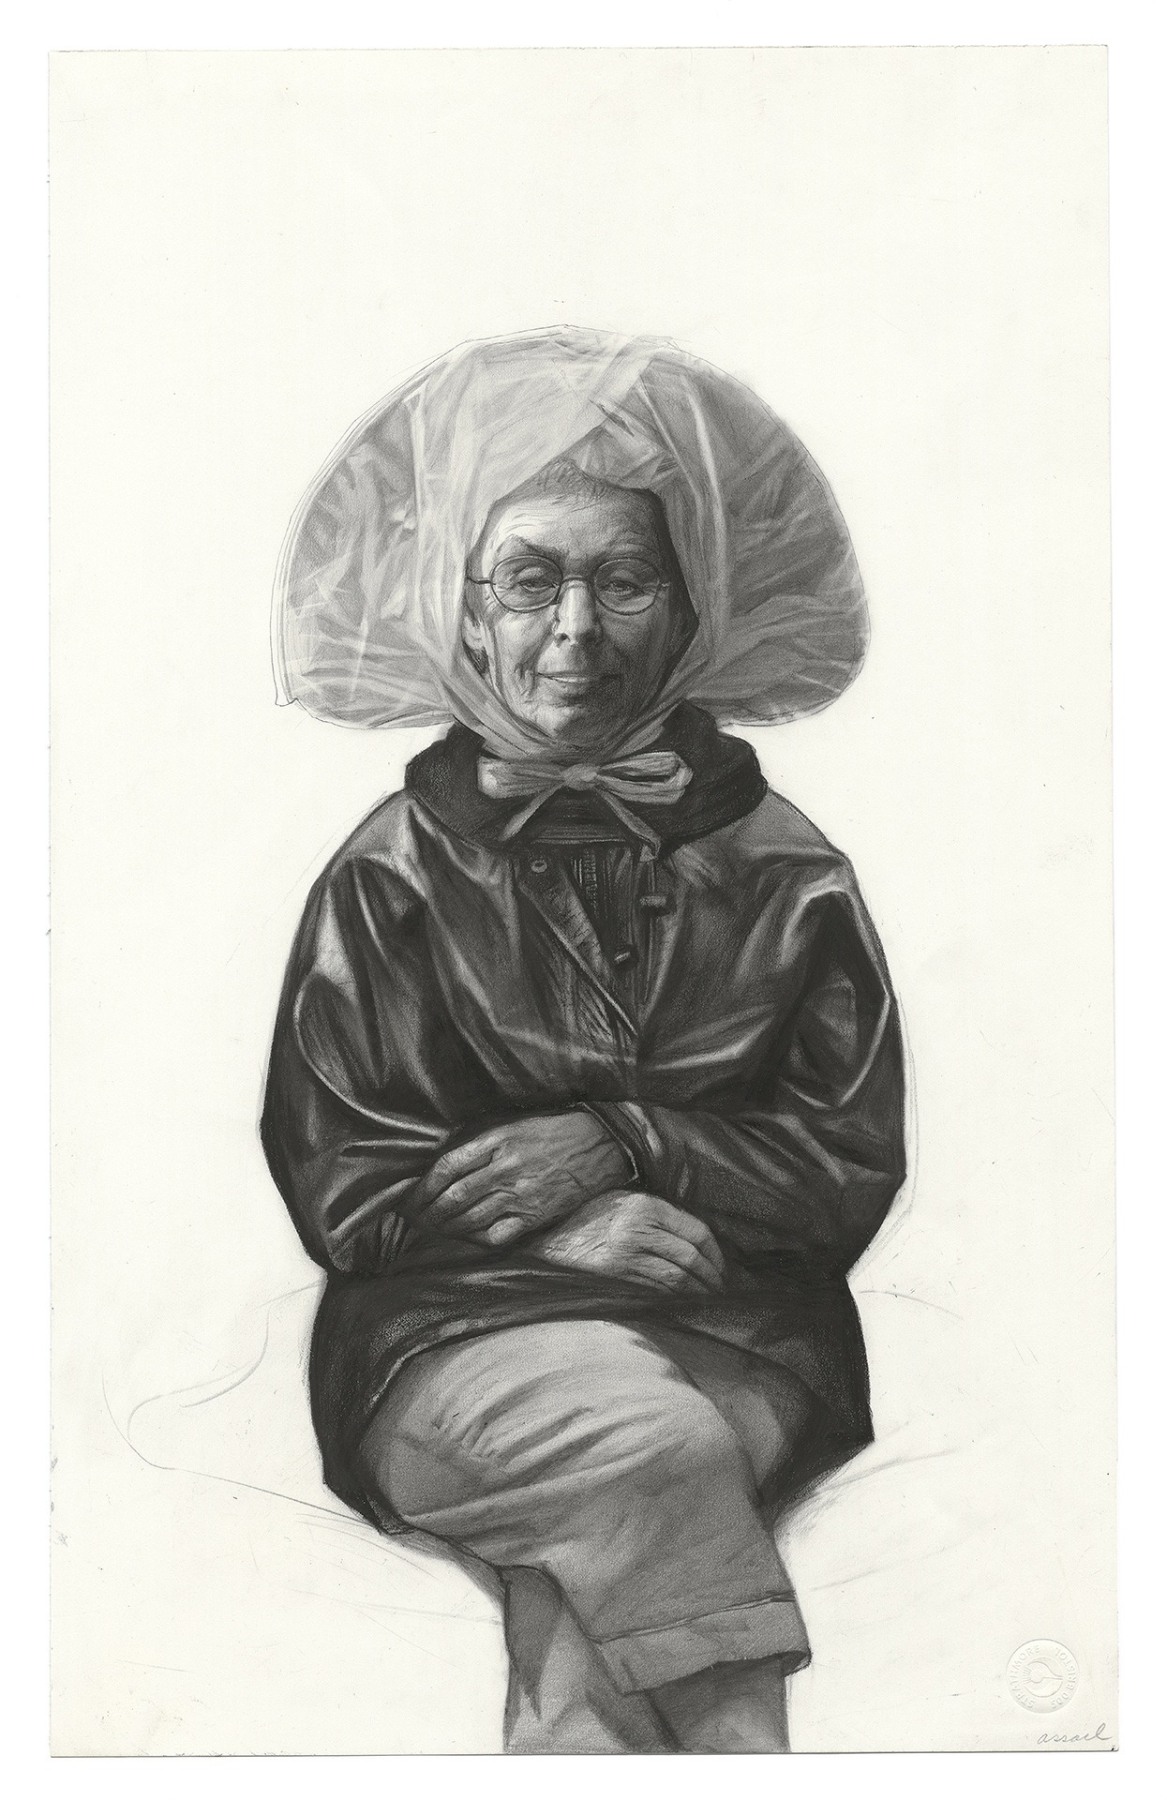 Steven Assael, Ruth, 2011, graphite on paper, 20 x 12 1/2 inches